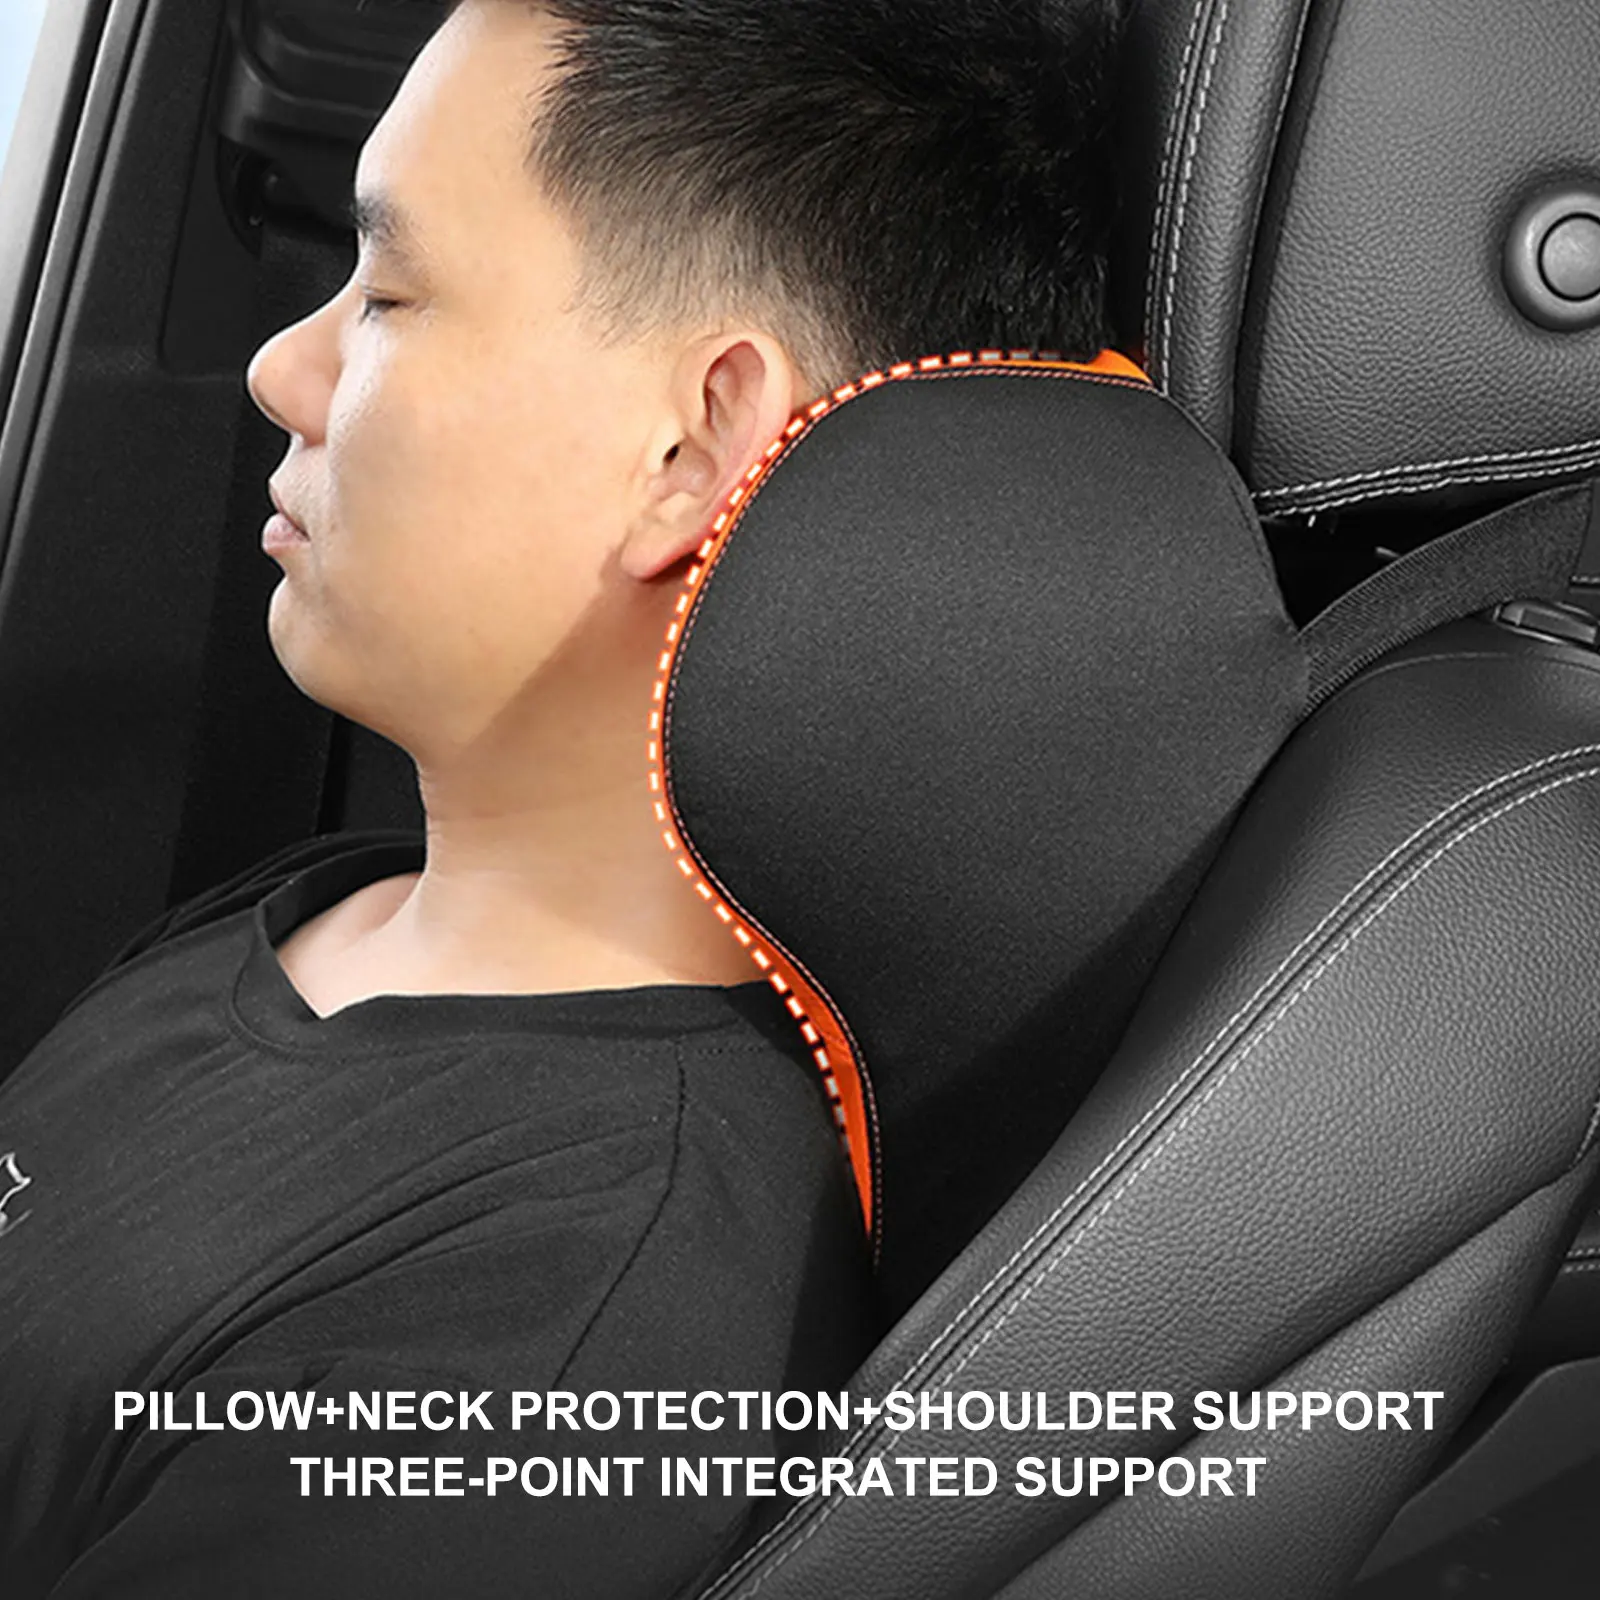 https://ae01.alicdn.com/kf/Sf93be9a66e054b64b8fcbfce37696bc95/Memory-Cotton-Neck-Pillow-Car-Seat-Pillow-Support-Auto-Lumbar-Cushion-Comfortable-And-Breathable-Car-Headrest.jpg